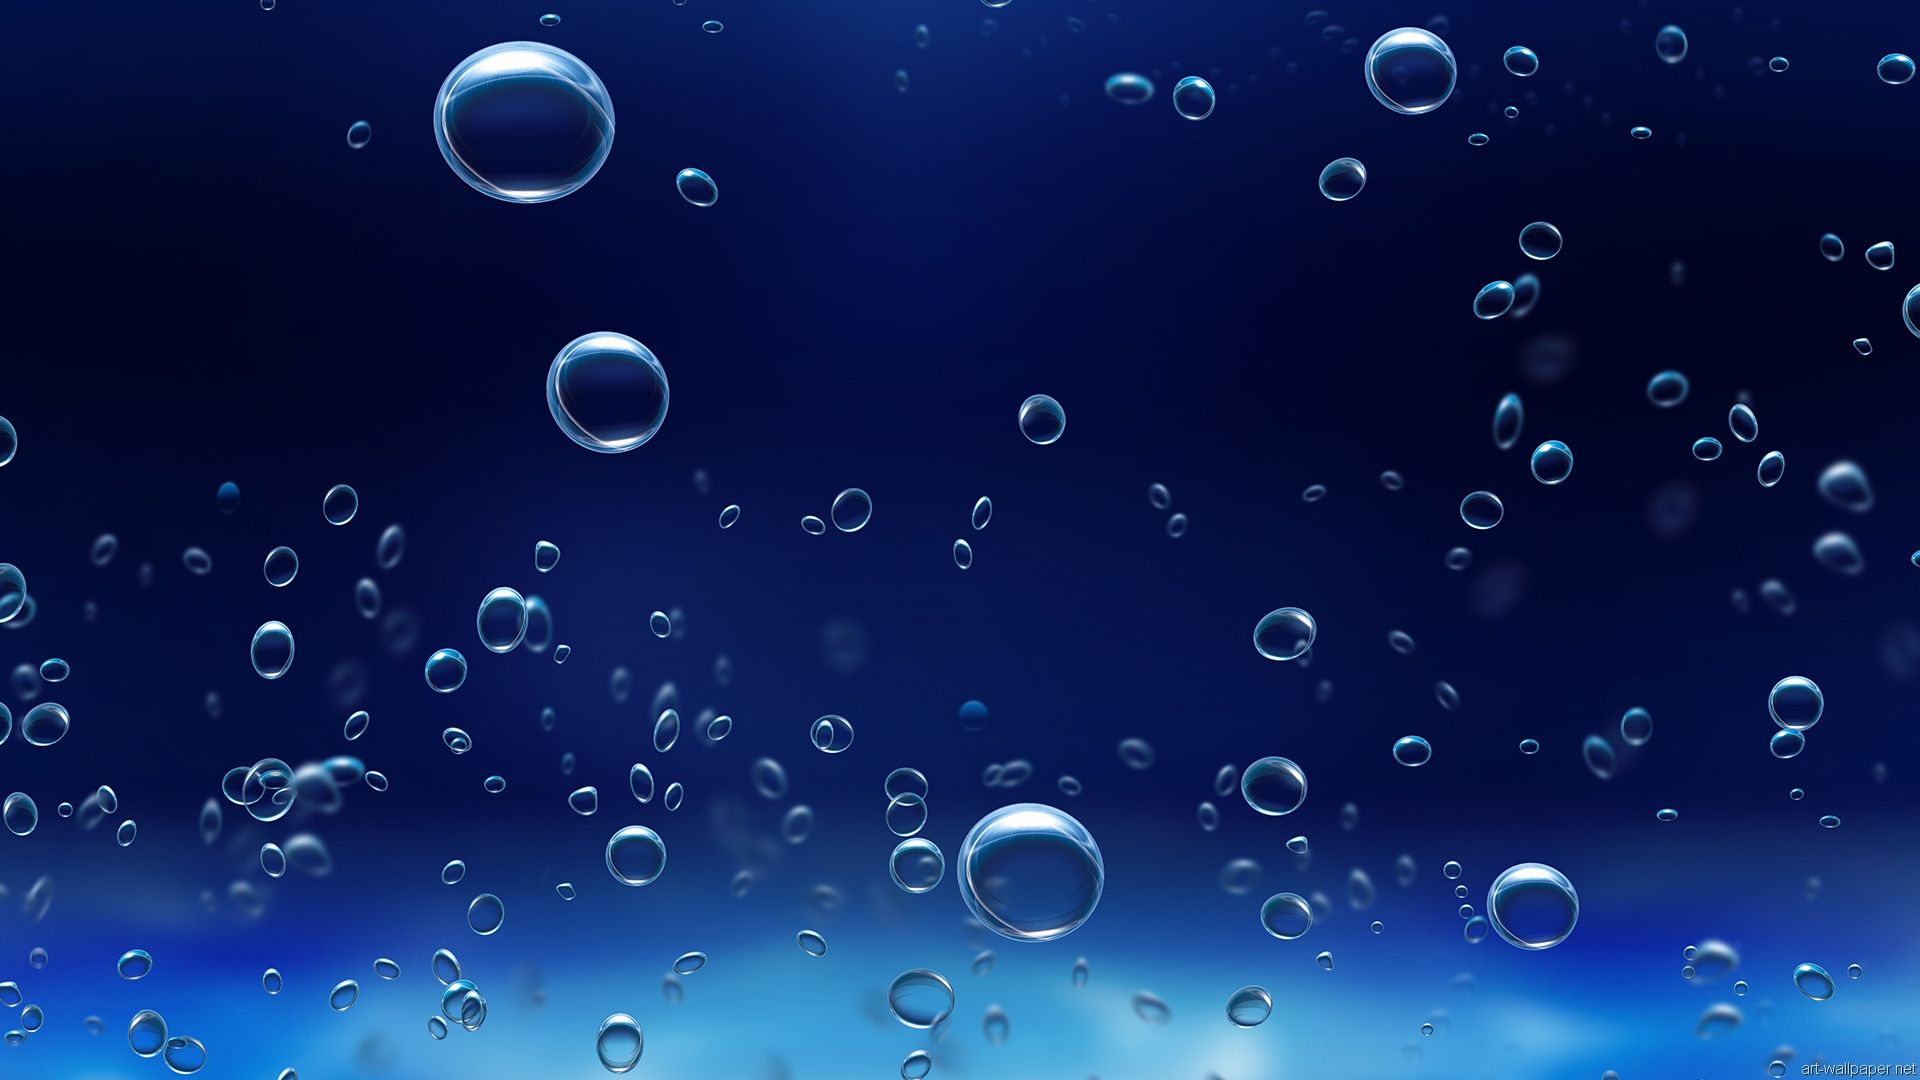 Bubbles on the water wallpaper - Photography wallpapers - #23398 - Bubbles